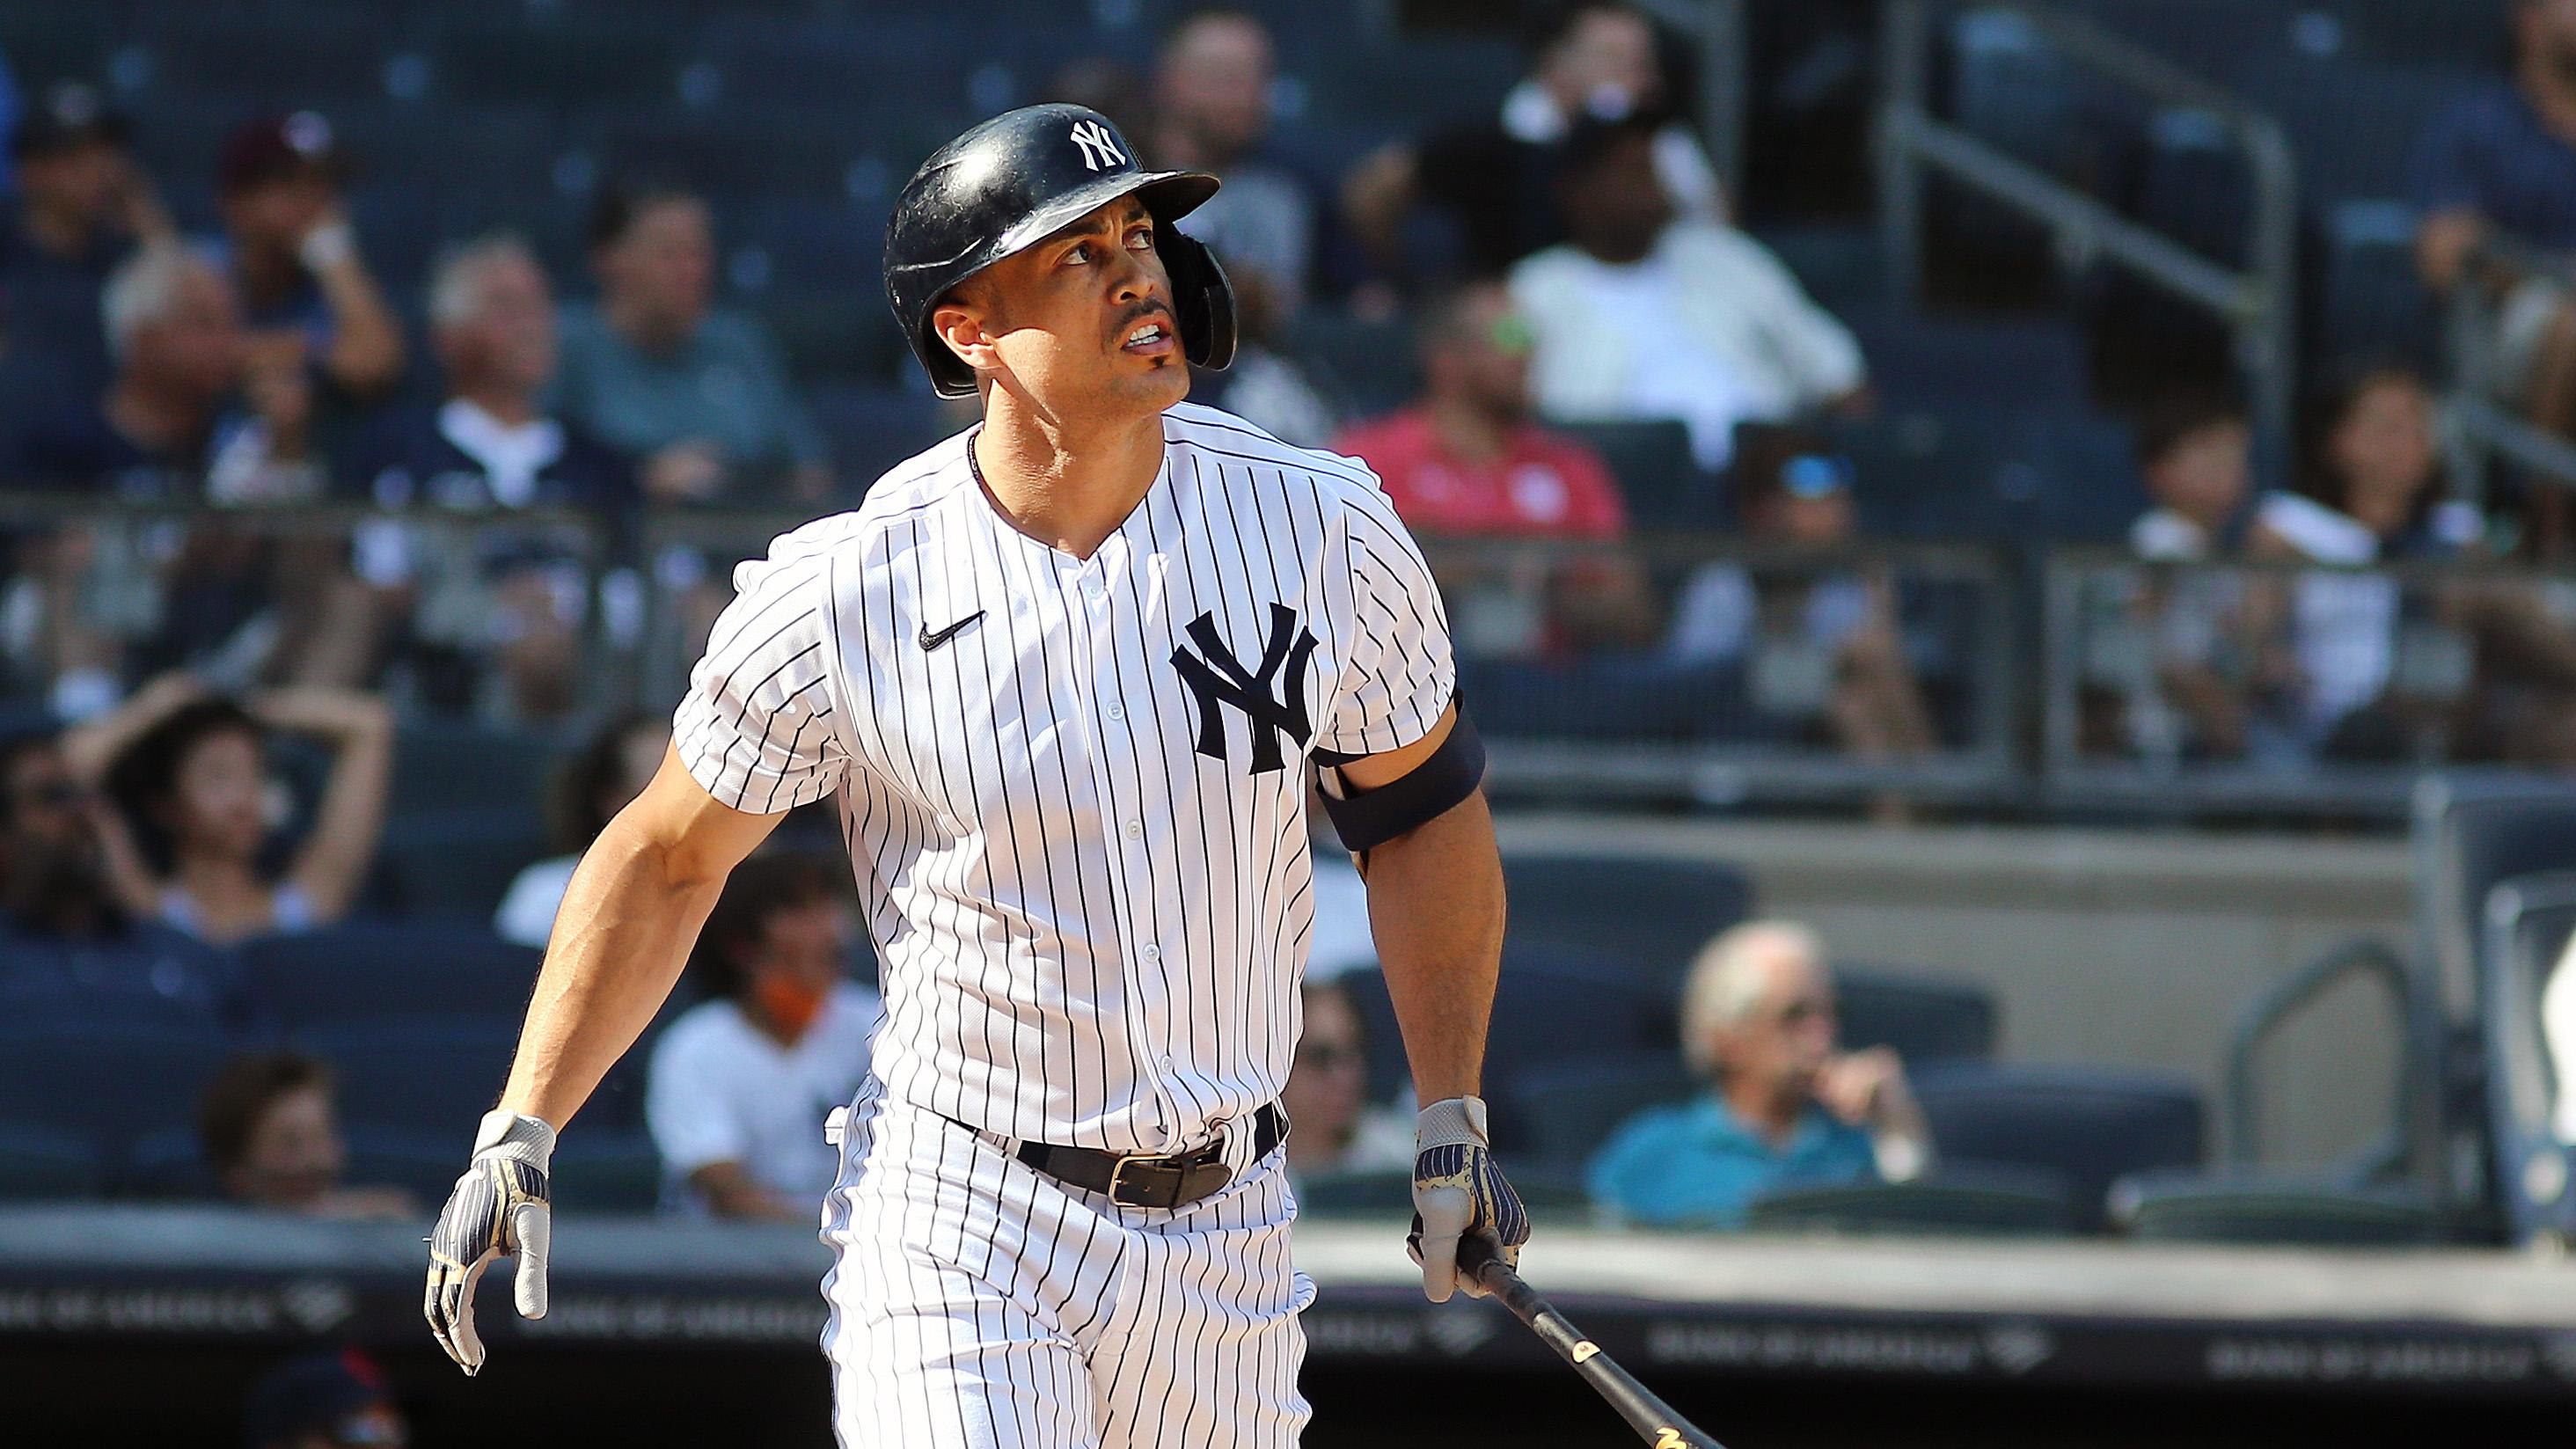 New York Yankees designated hitter Giancarlo Stanton (27) hits a two run home run against the Cleveland Indians during the seventh inning at Yankee Stadium. / Andy Marlin-USA TODAY Sports